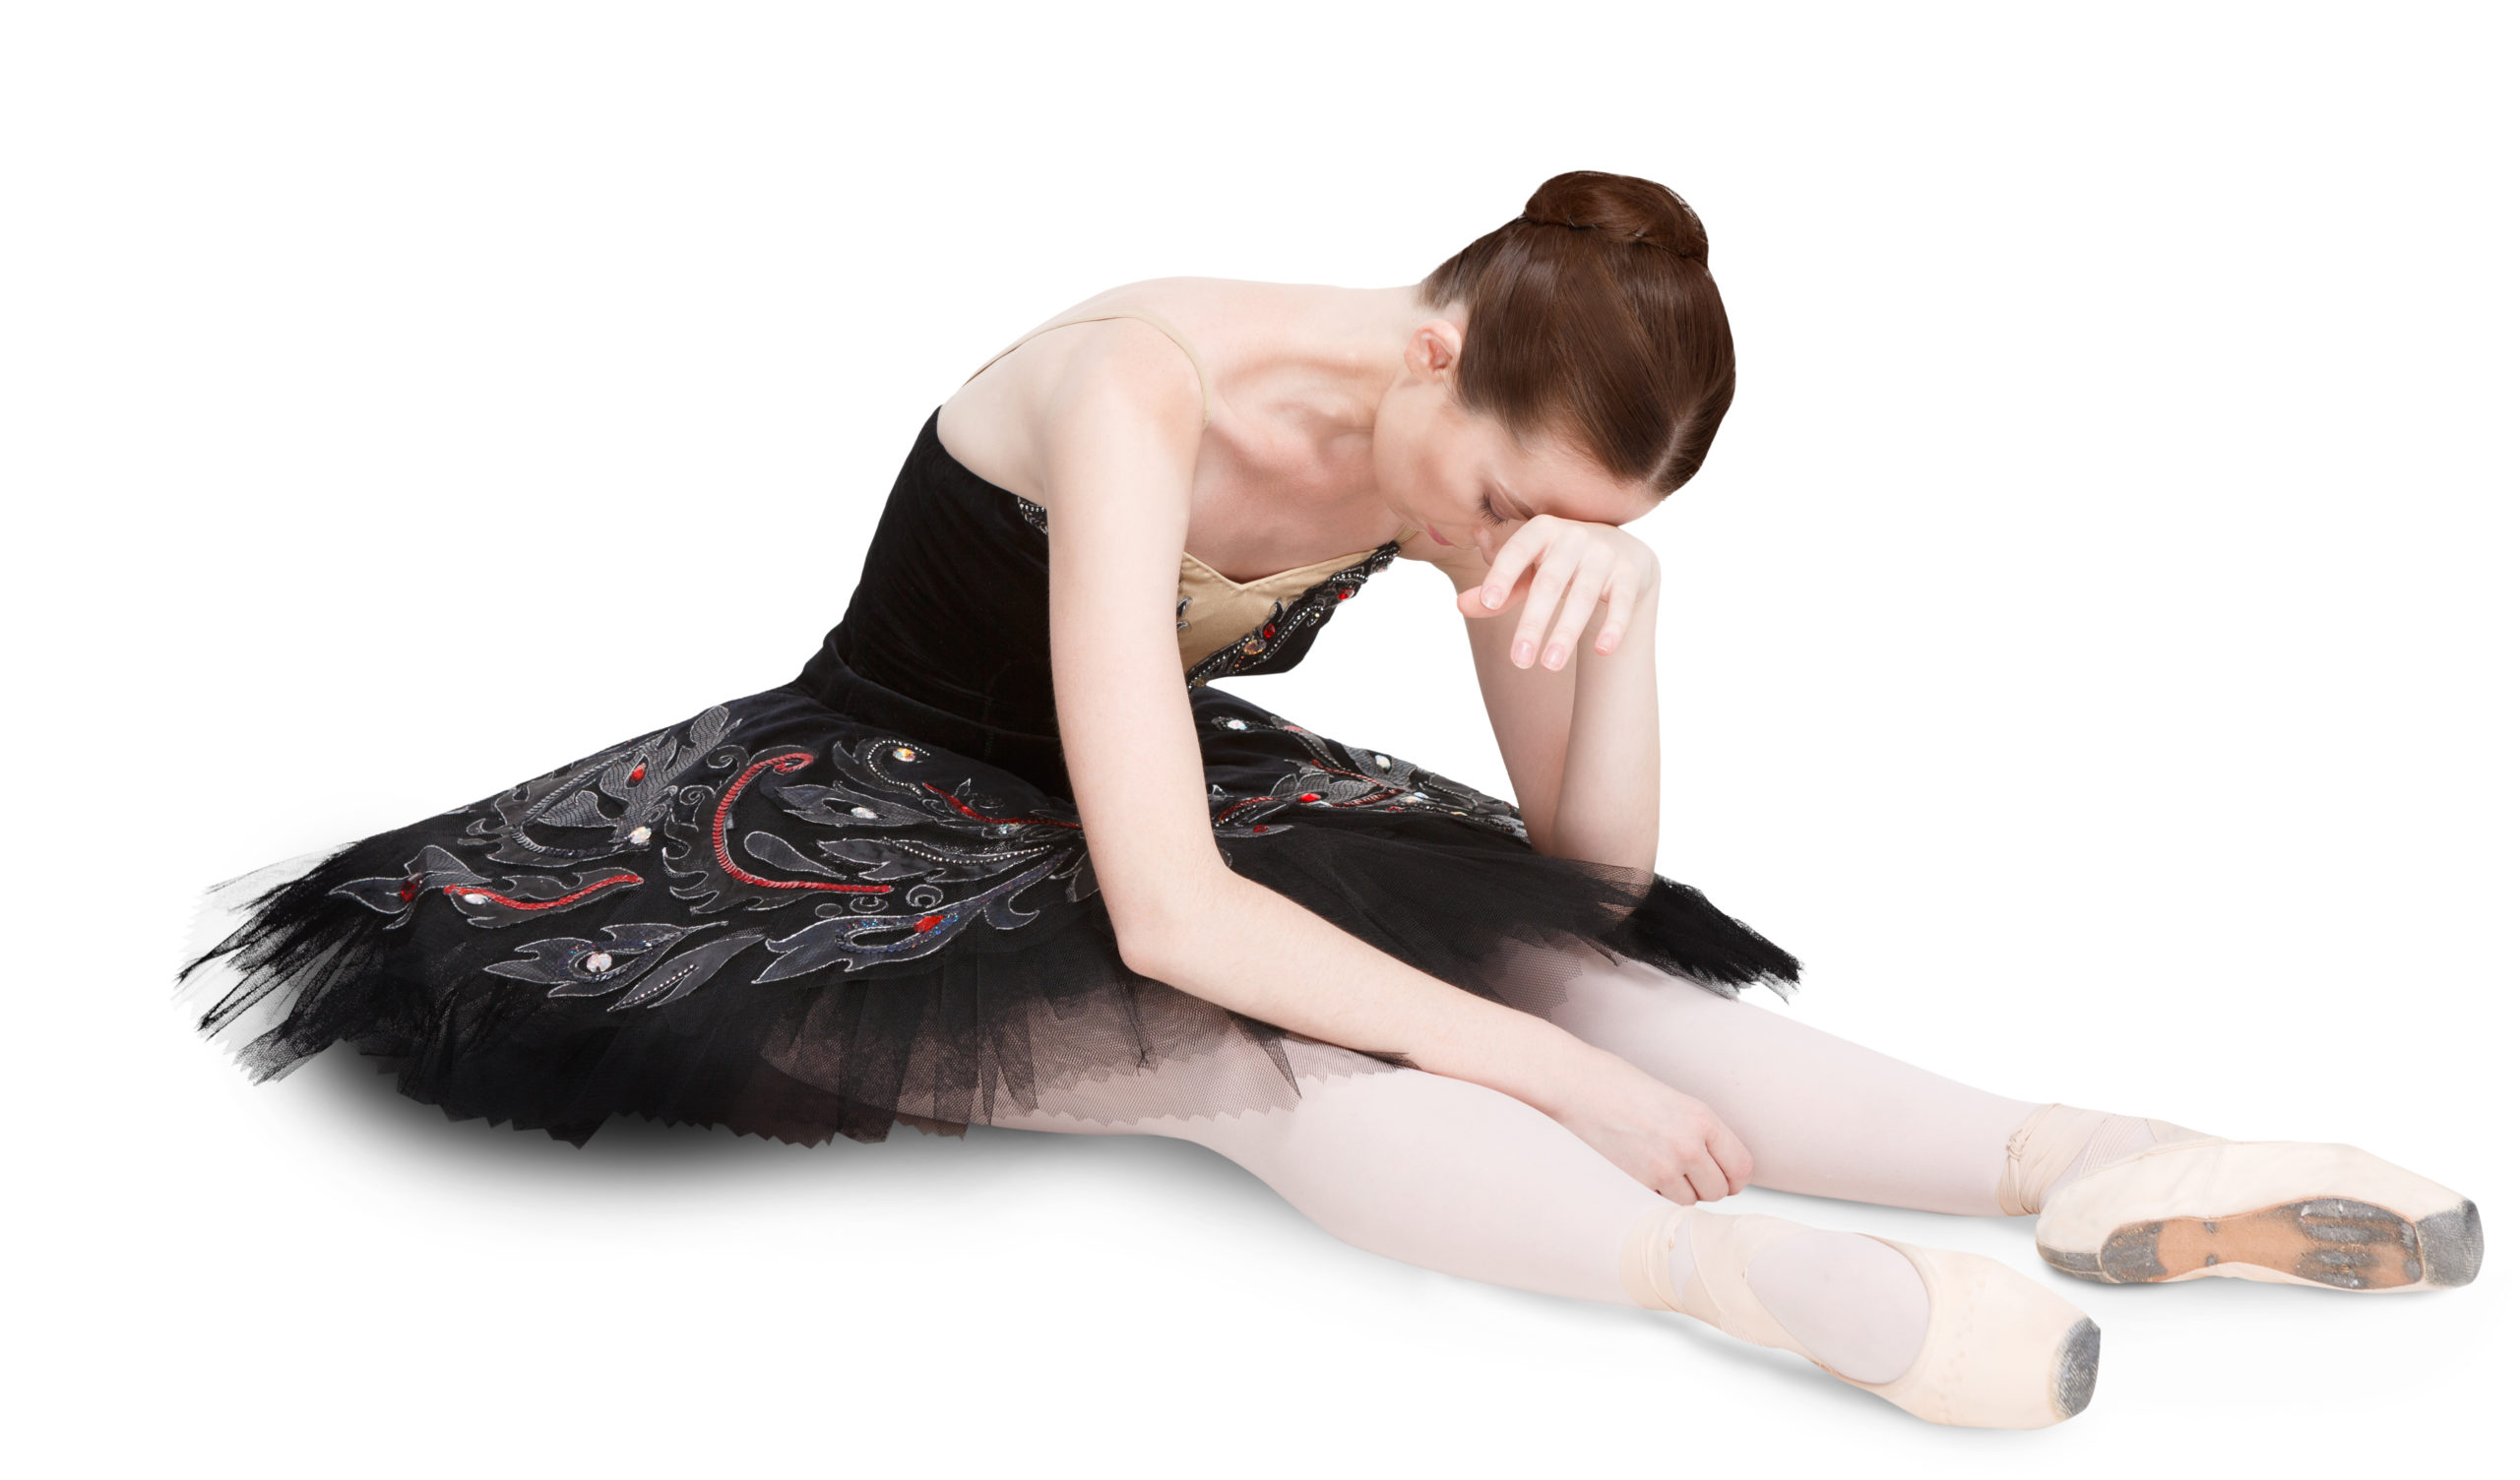 Ballerina in a black-and-red tutu, tights and pointe shoes sits on the floor resting her head on her hand. She looks exhausted and upset.